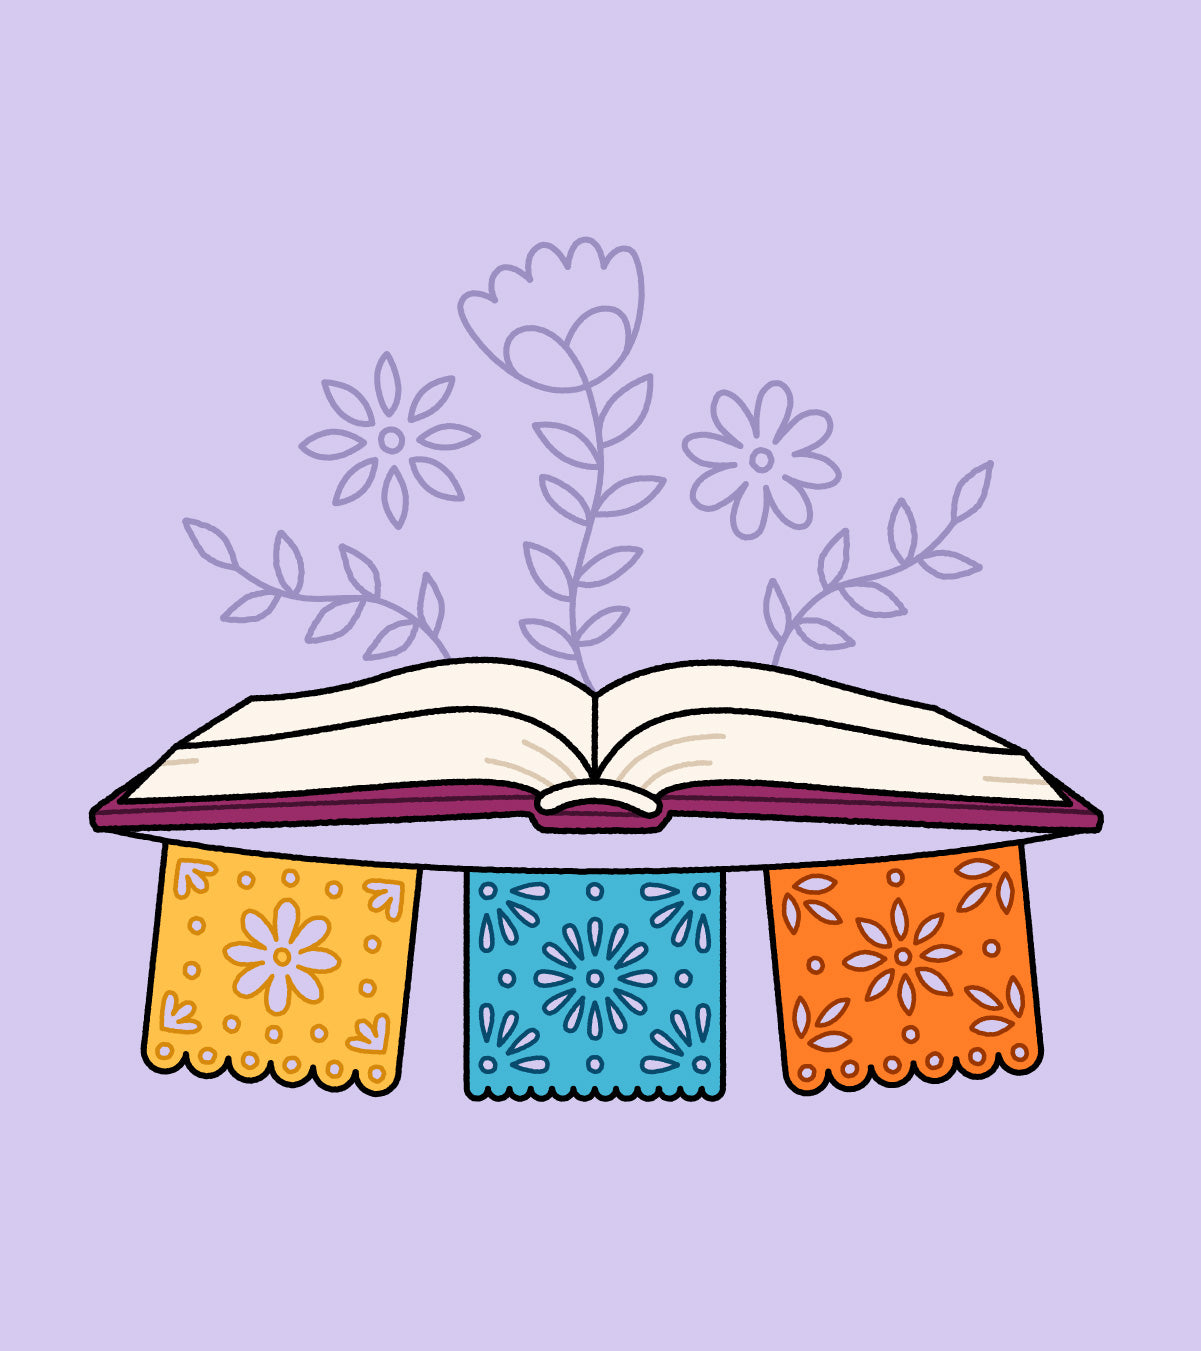 An open book on a lilac background, papel picado banners hanging below